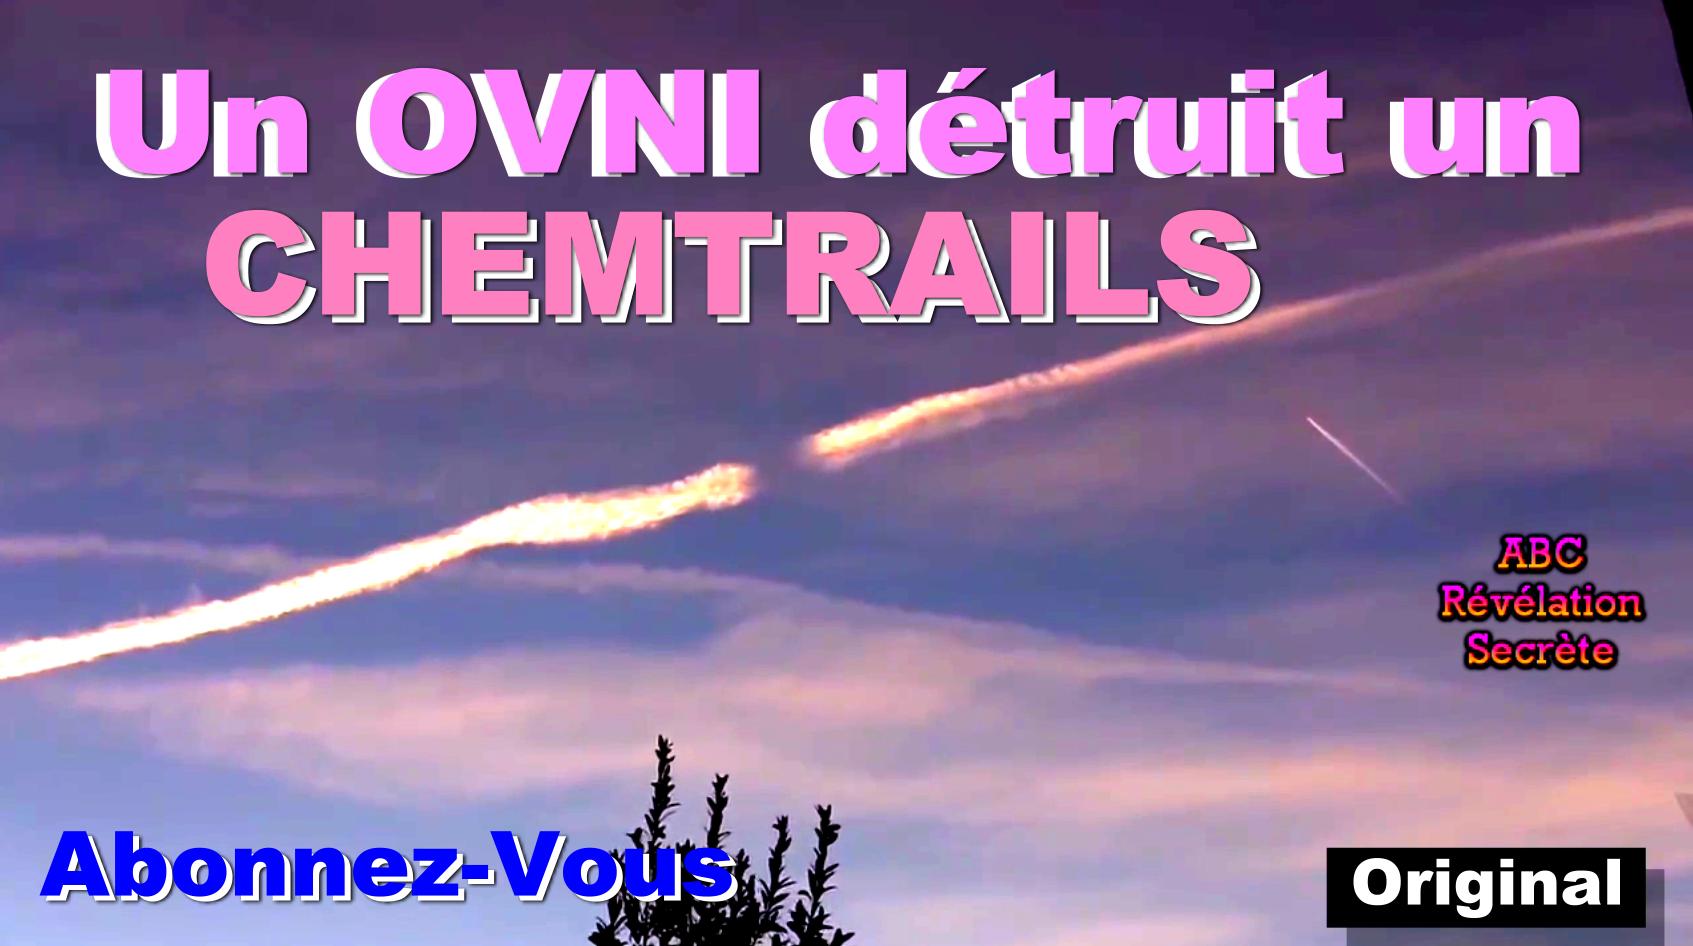 Reveal secrets. Chemtrails over the Country Club.